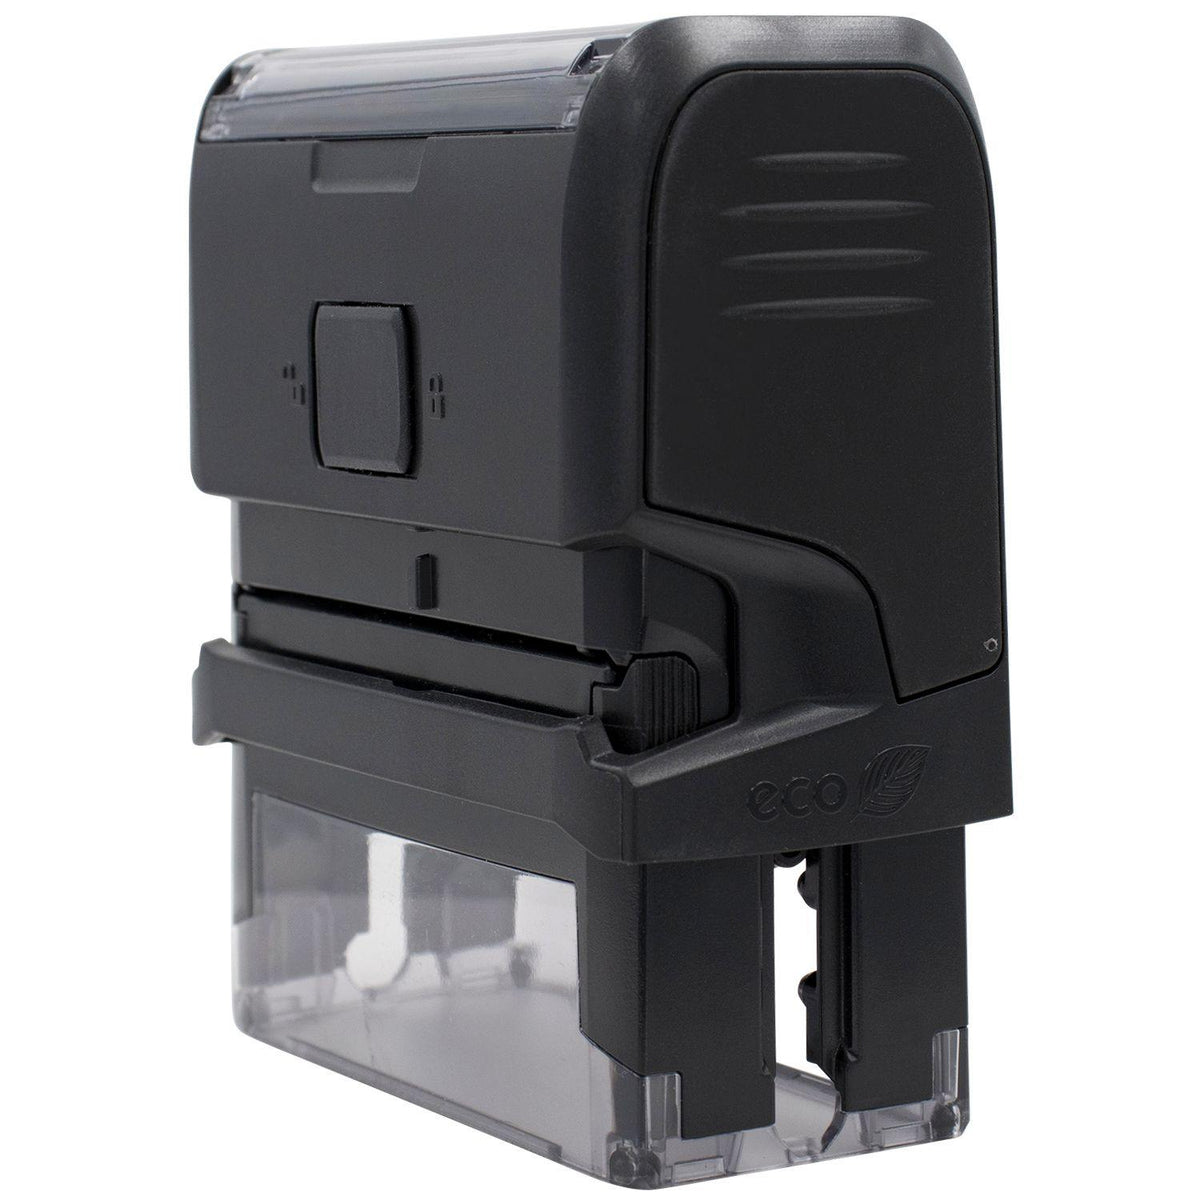 Self Inking Exhibit Stamp - Engineer Seal Stamps - Brand_Trodat, Impression Size_Small, Stamp Type_Self-Inking Stamp, Type of Use_Legal